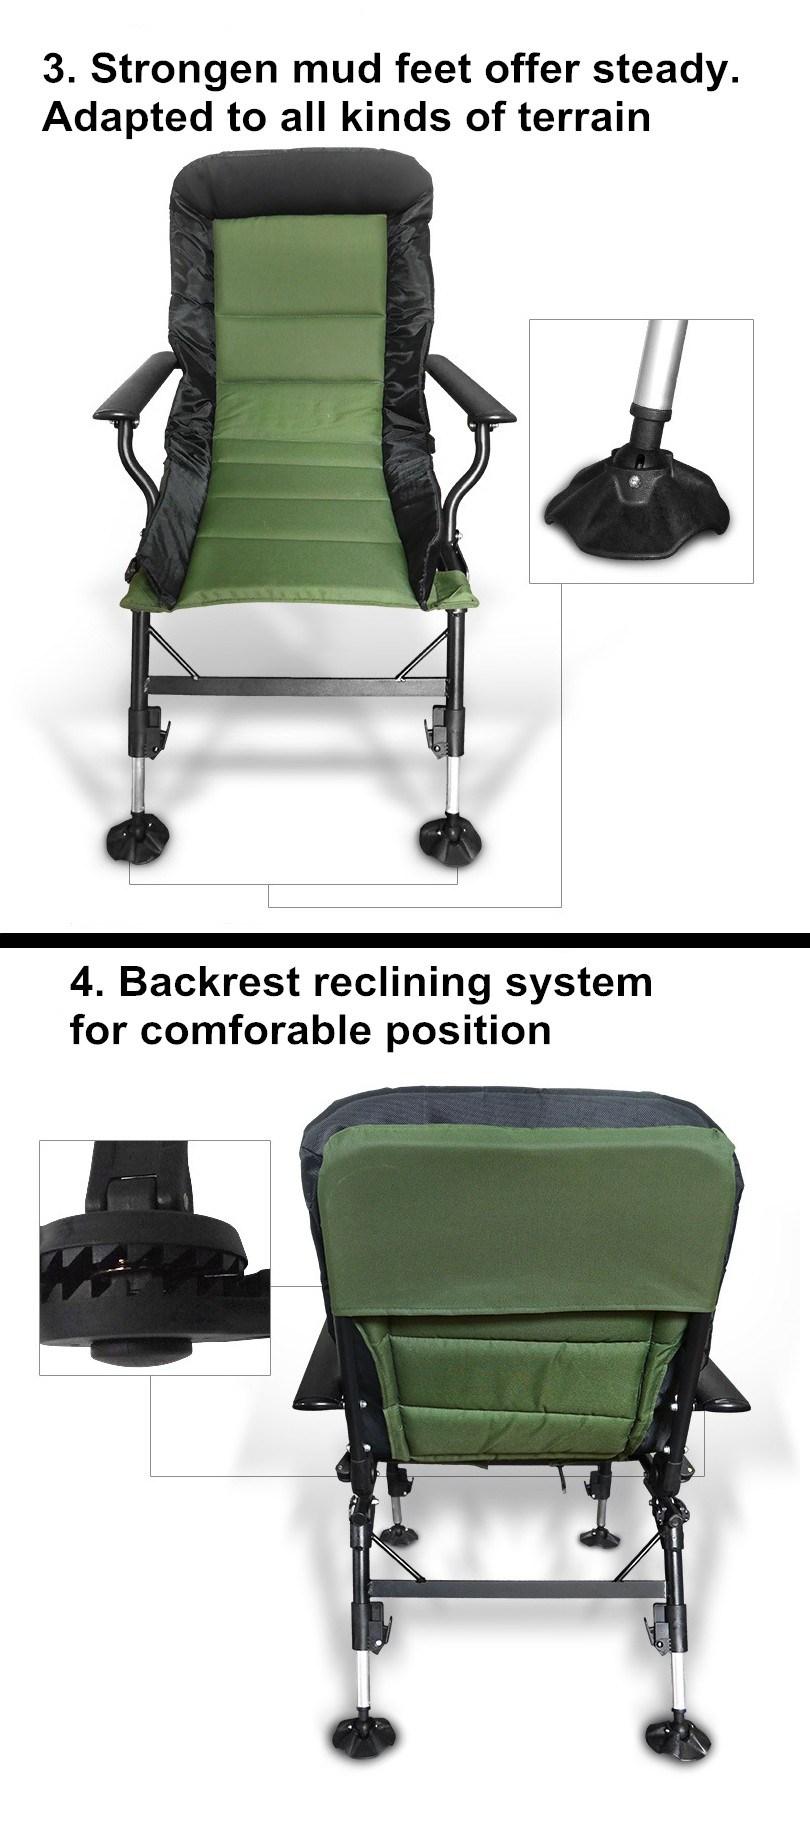 Army Green Aluminum Tube Water Proof Oxford Cloth Carp Chair